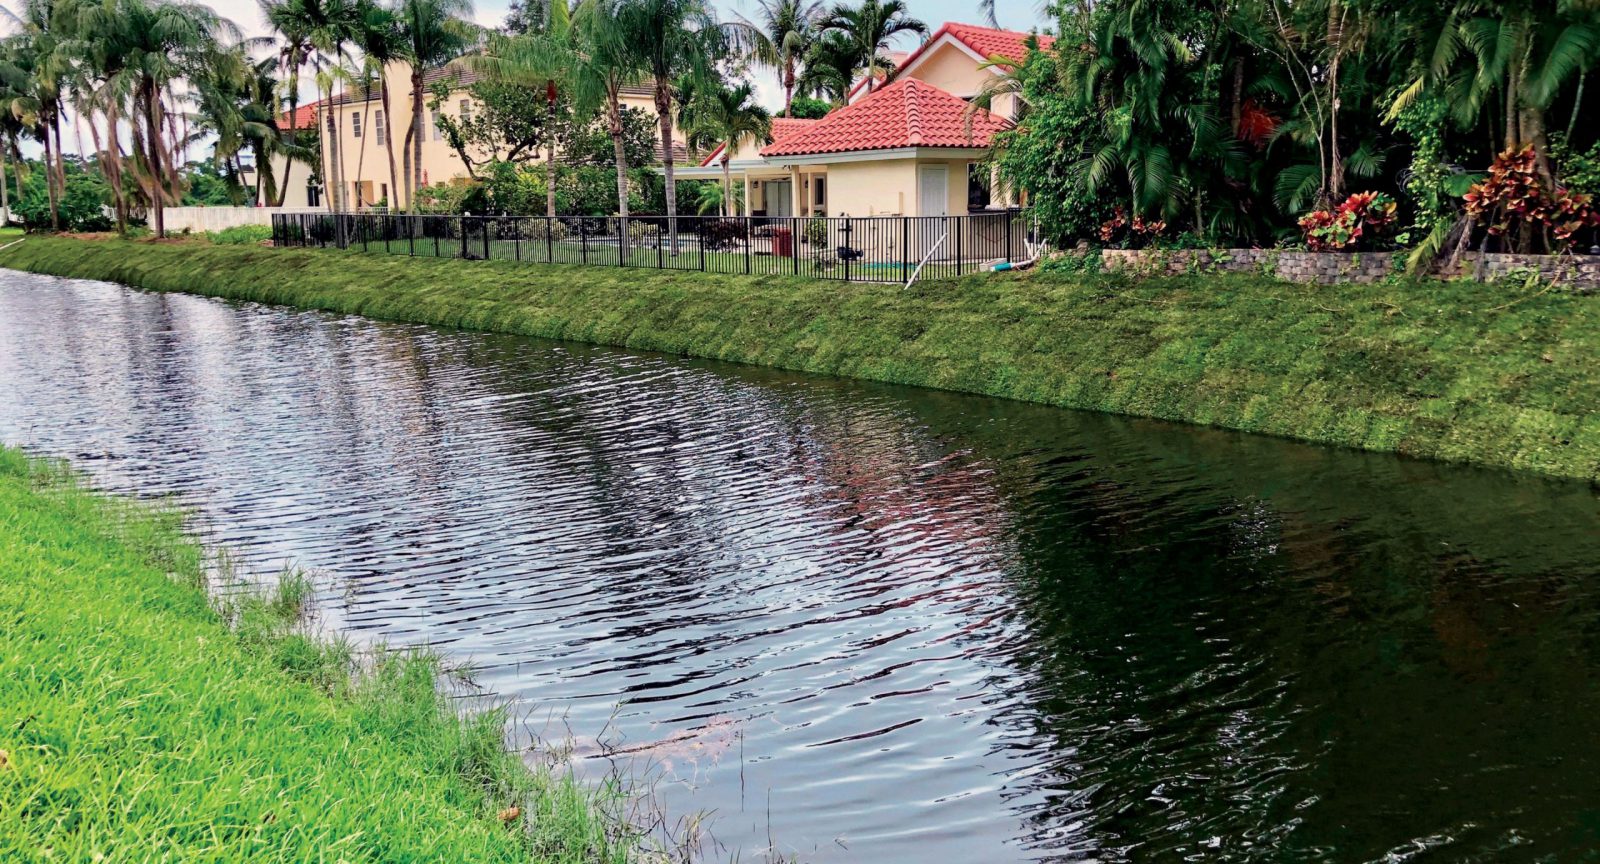 erosion control and shoreline stabilization with beneficial plants - florida - after - hoa and community